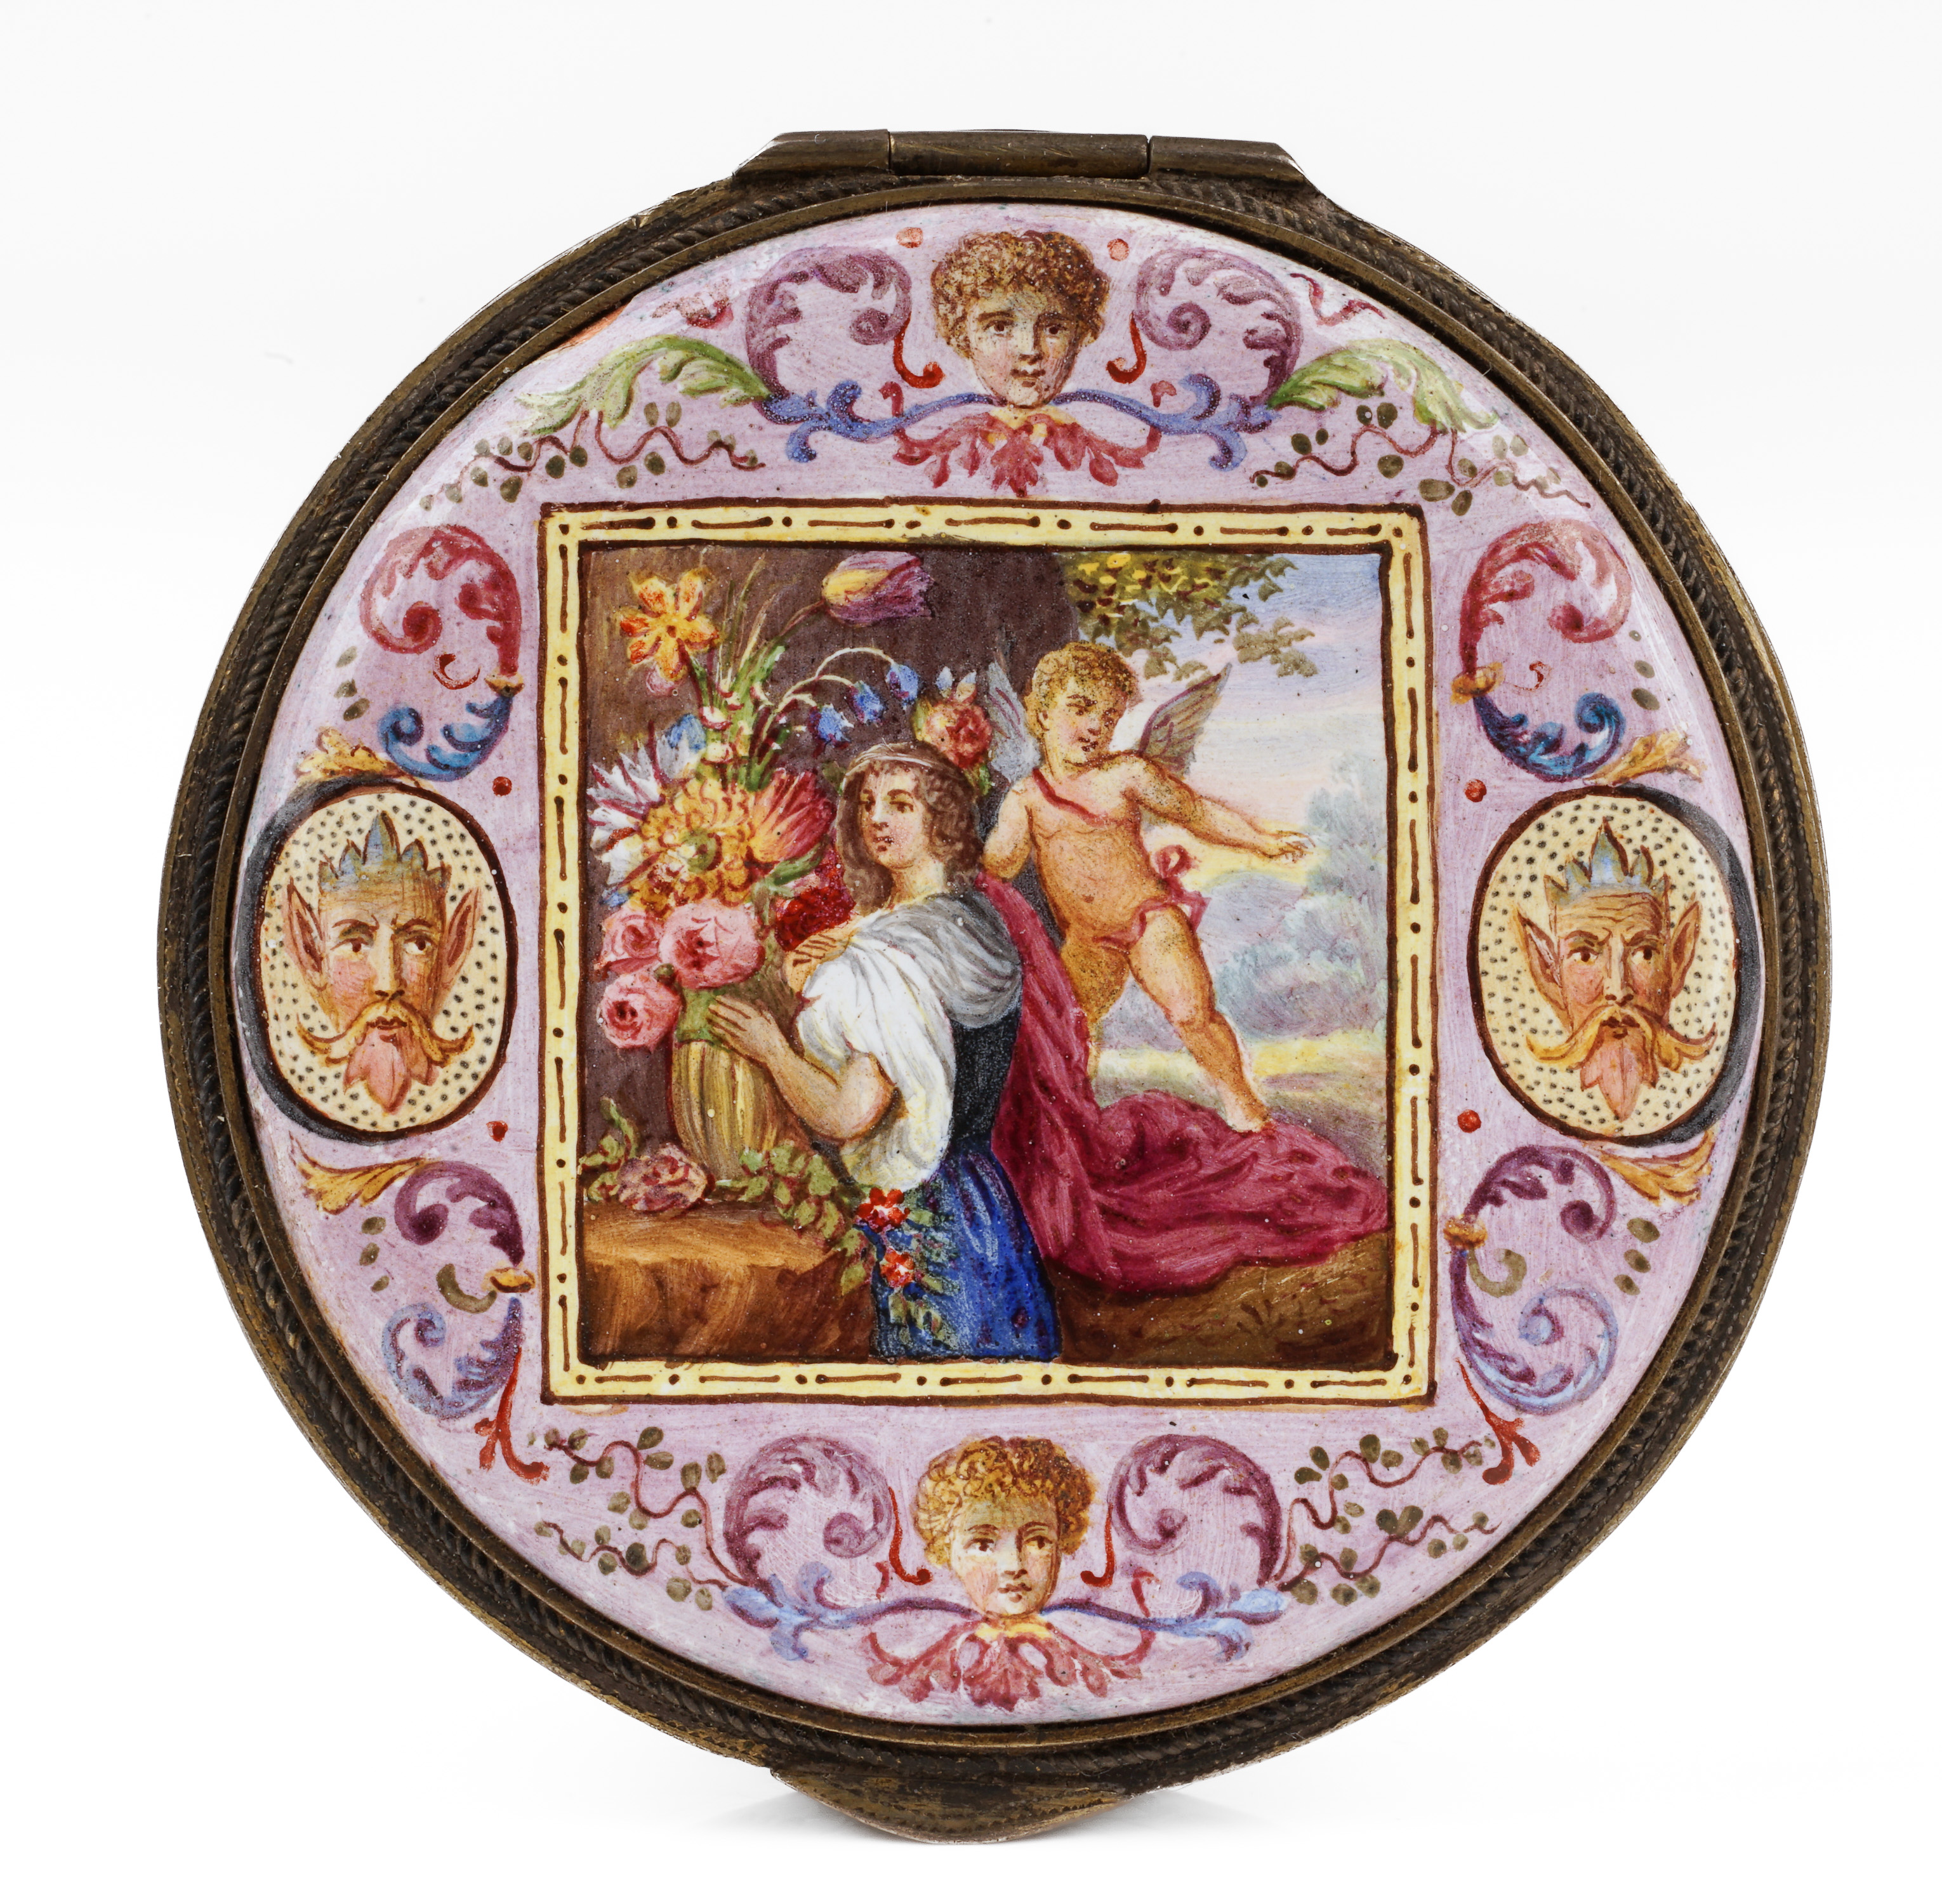 Round Viennese enamel box, painted with